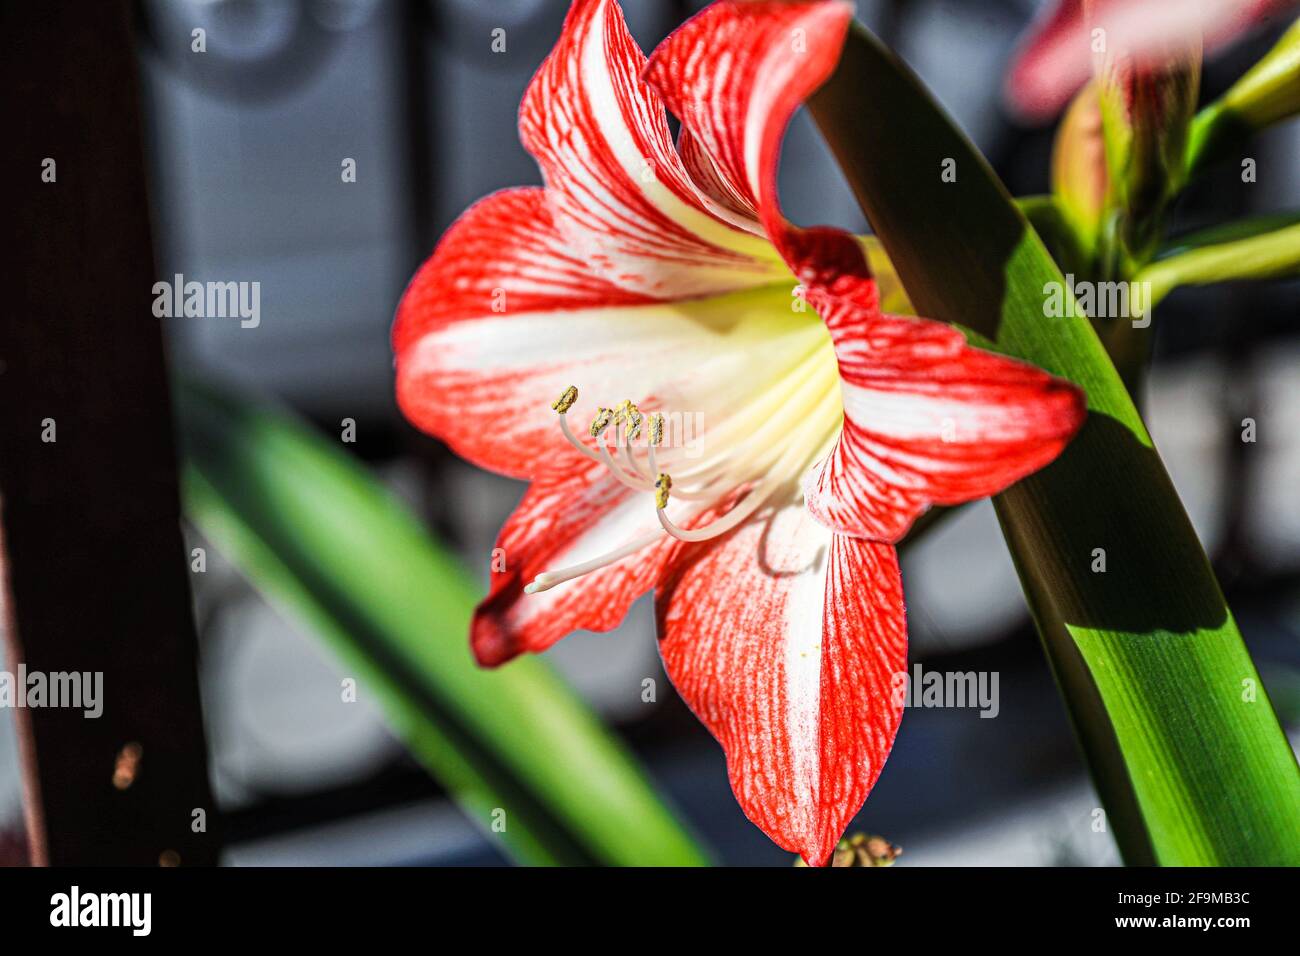 Amaryllis Flaming Peacock, Lilium, Lily, Red and White Double Amaryllis,  Amaryllis Bulbs, Amaryllis Flowers Amaryllis Plants, Flaming Amaryllis  Peacock, Flowers, Pink, Striped, Petals, Houseplant, Plant, Spring ... (  Photo by Luis Gutierrez /